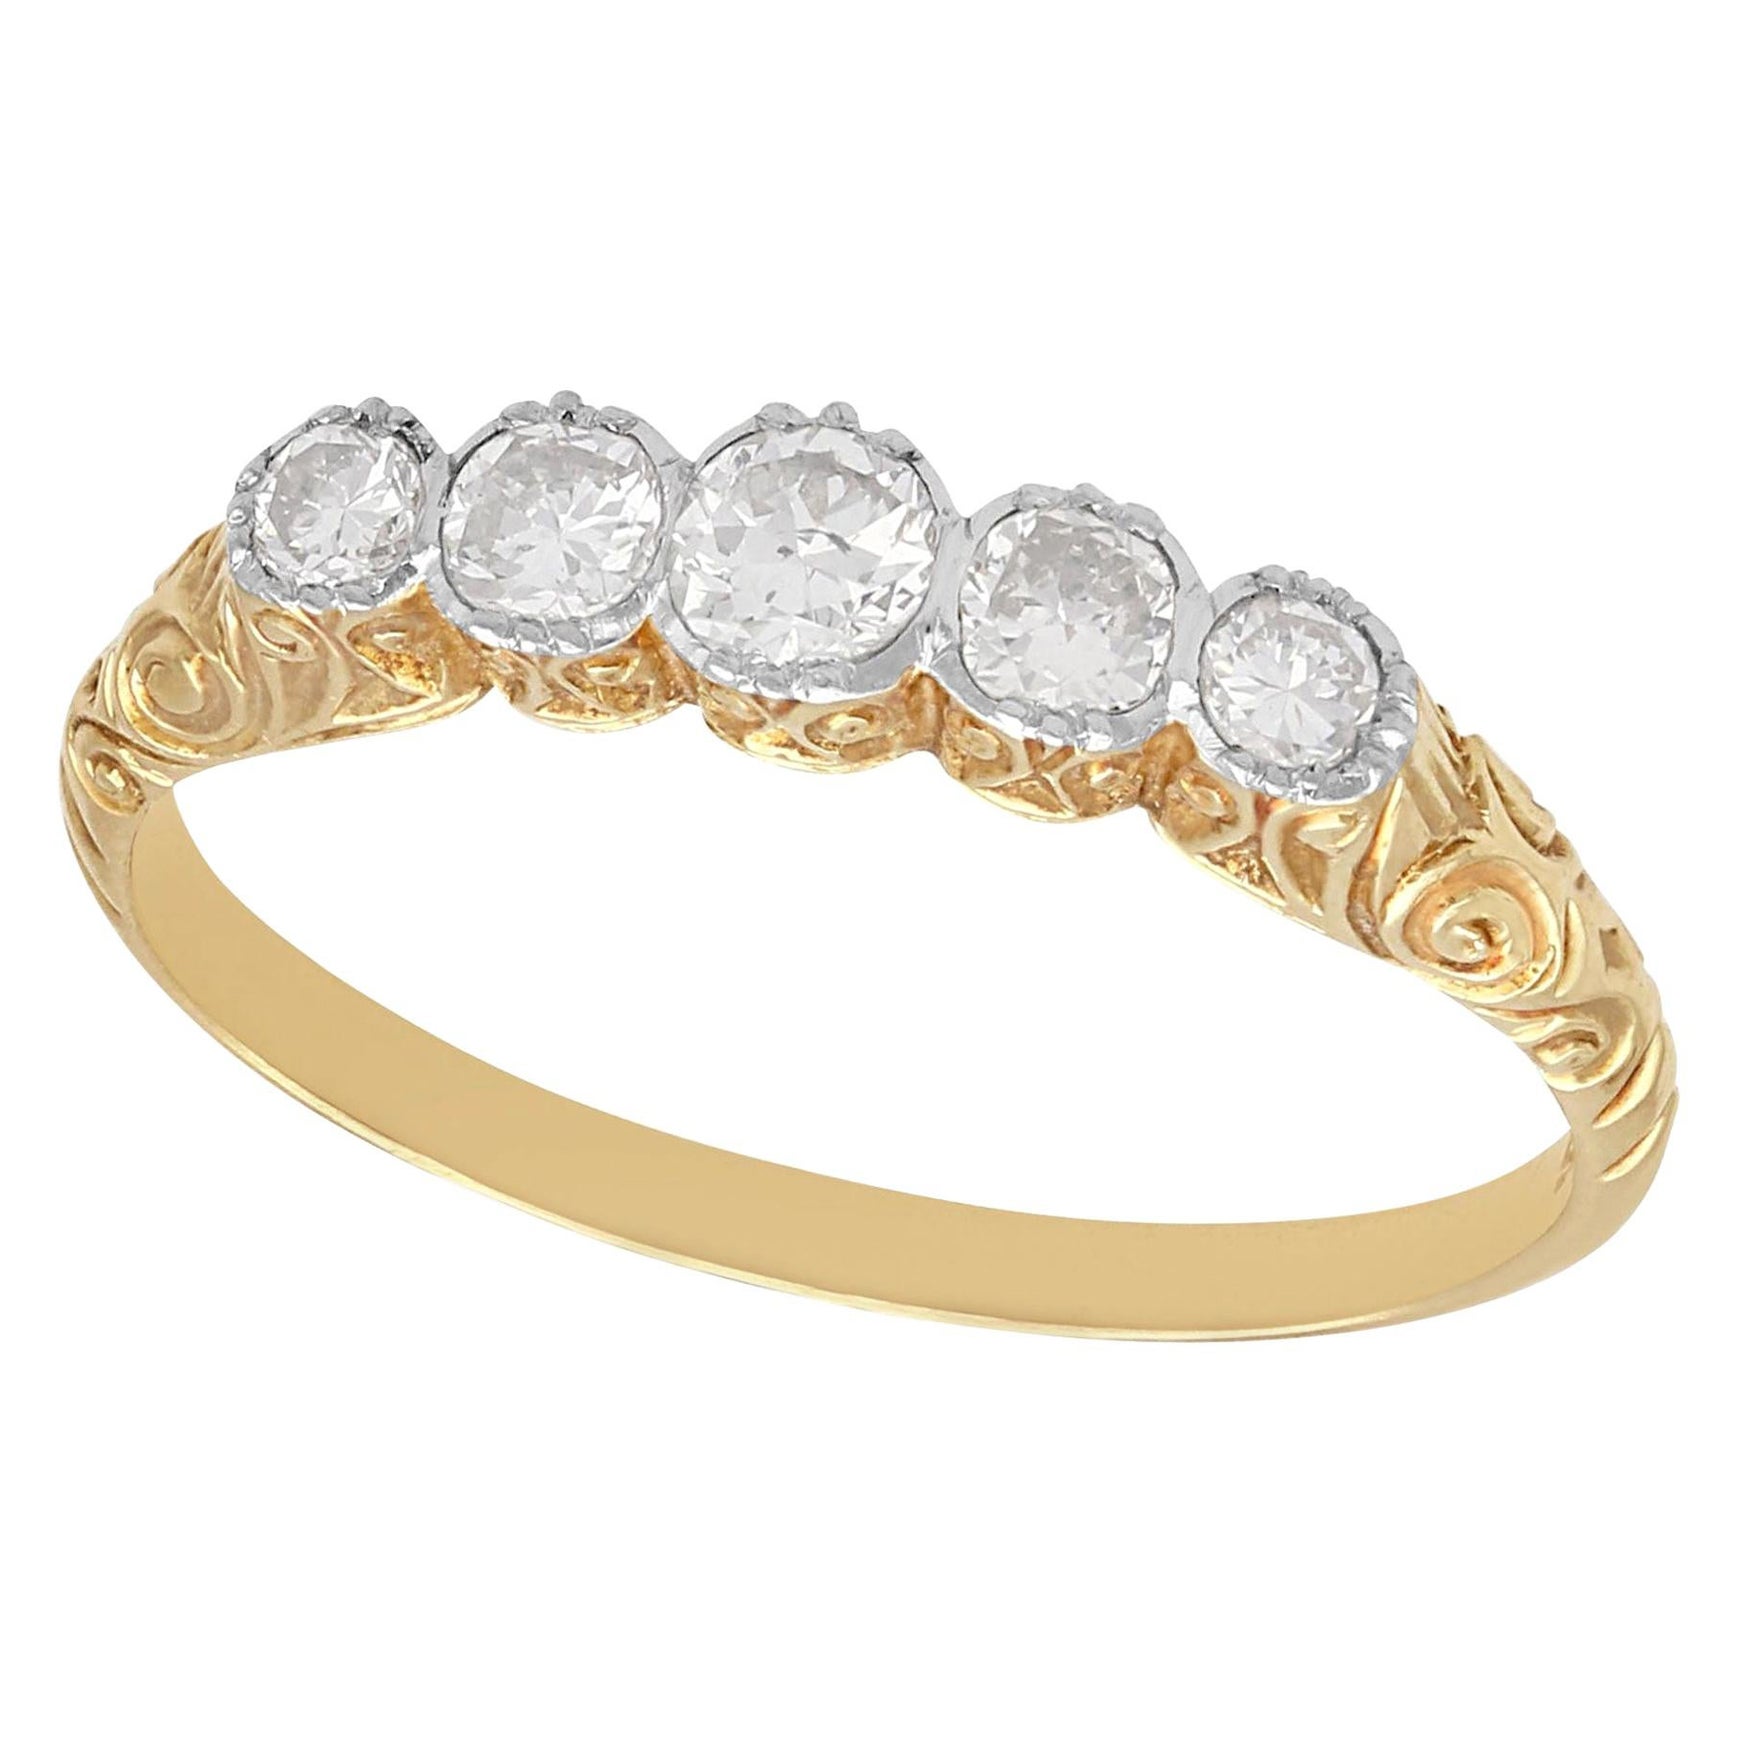 1920s Antique Diamond and Yellow Gold Five Stone Ring